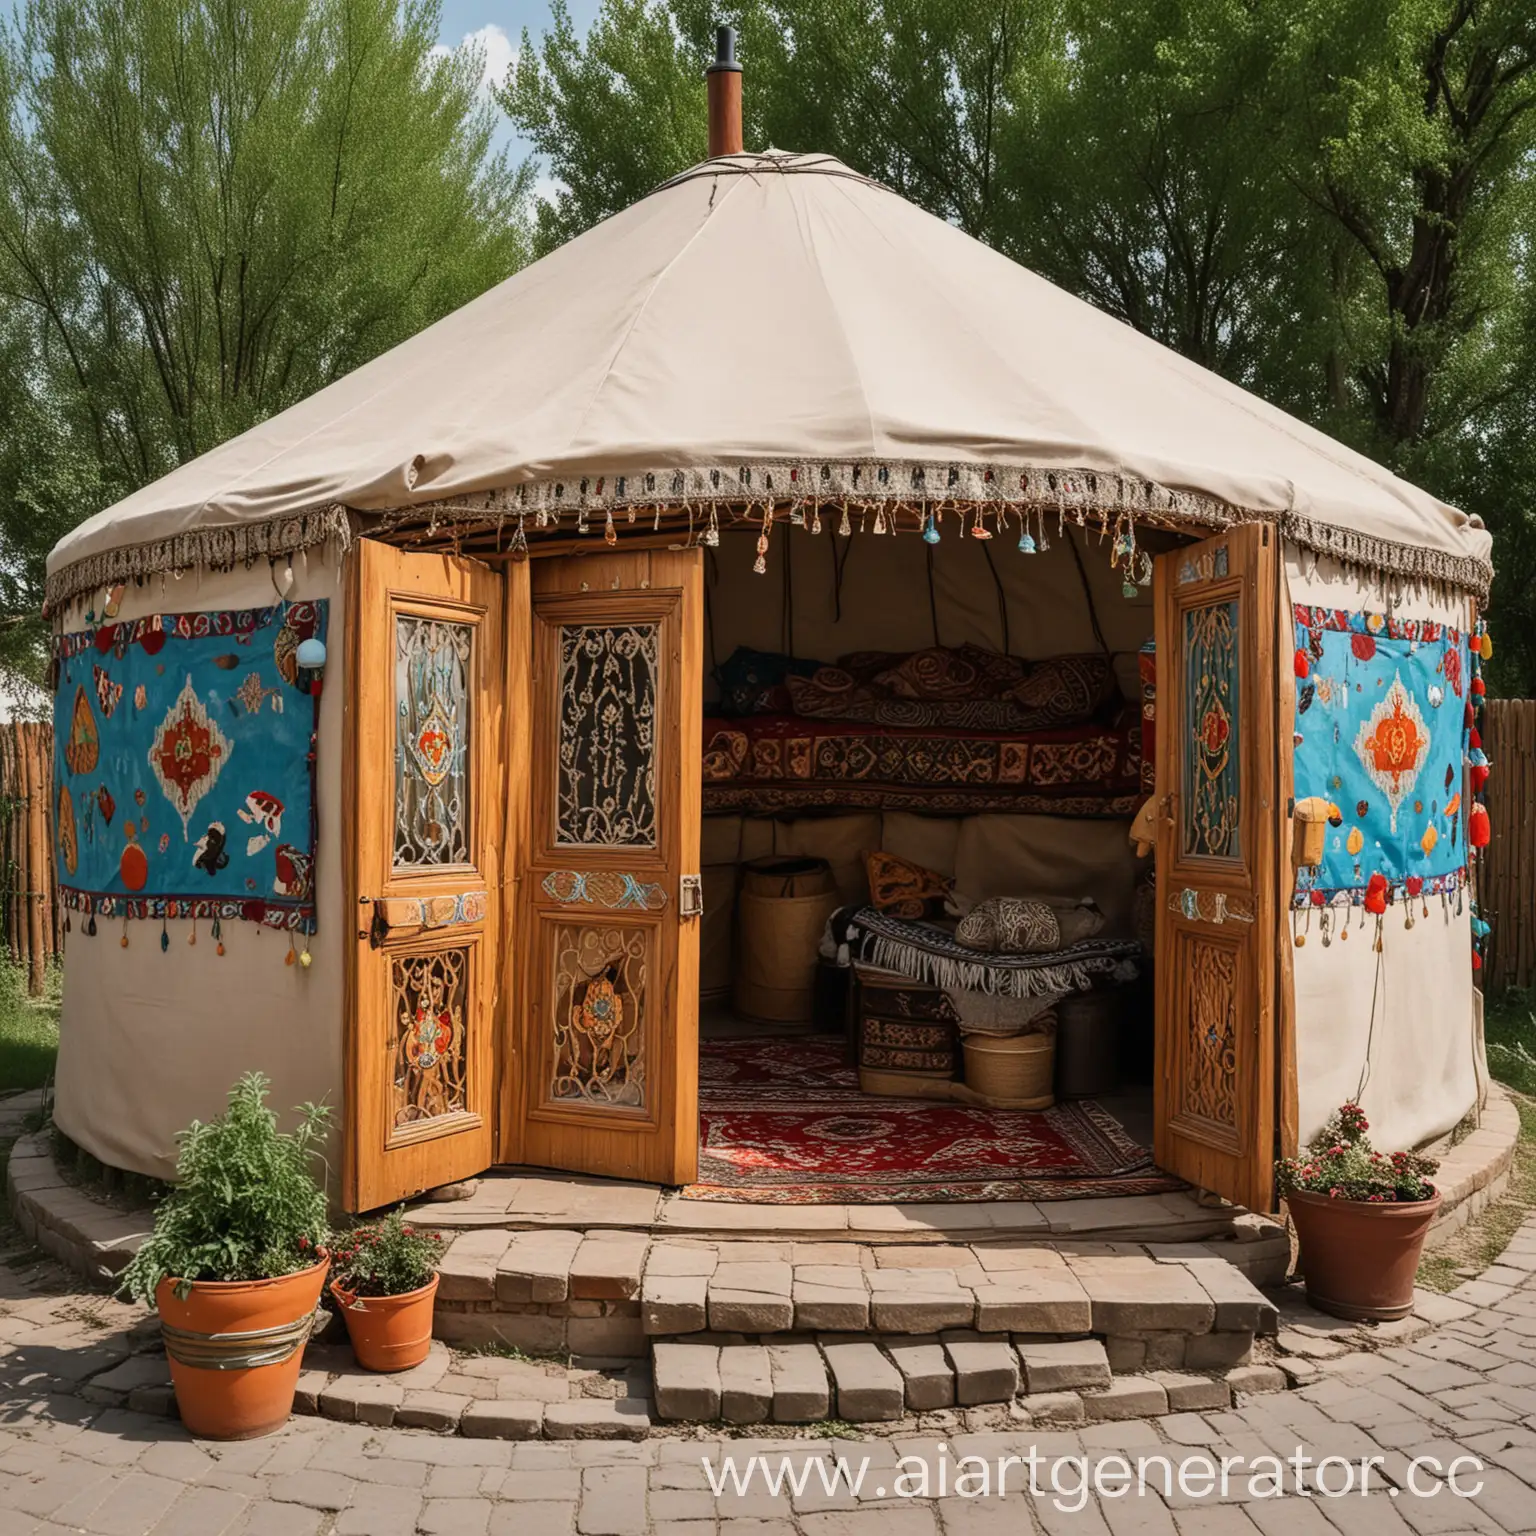 Traditional-Kazakh-Yurt-Decorated-with-Cultural-Ornaments